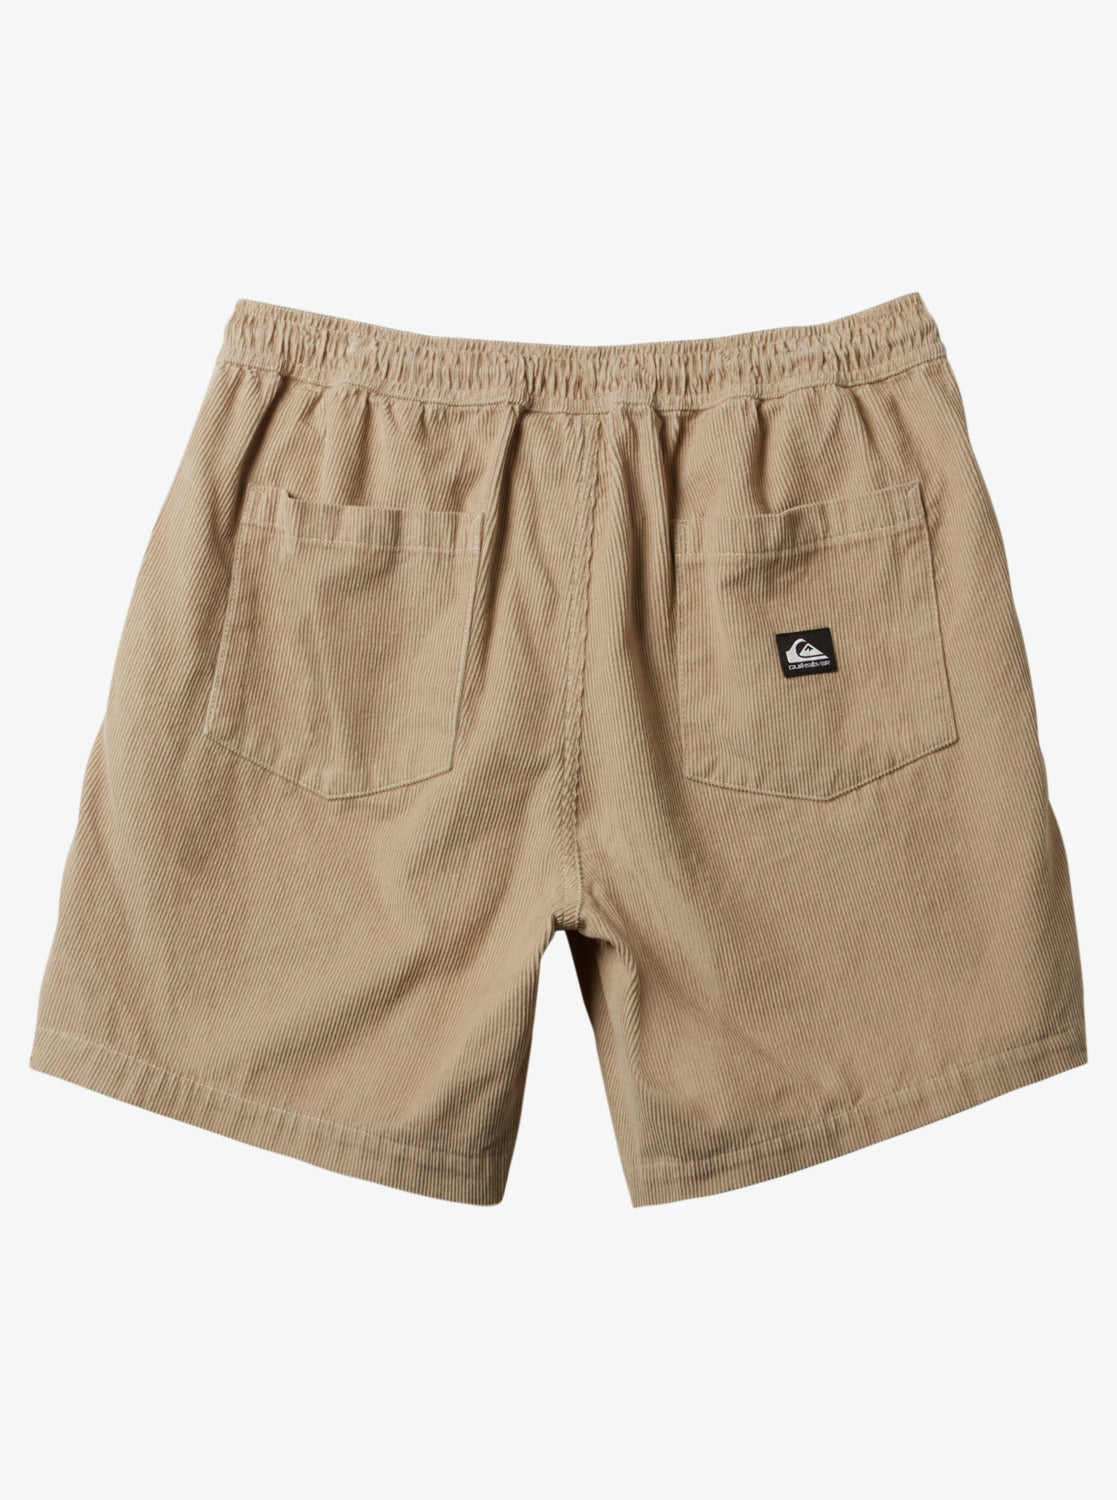 Quiksilver Taxer Cord - Plaza Taupe - Star Surf + Skate